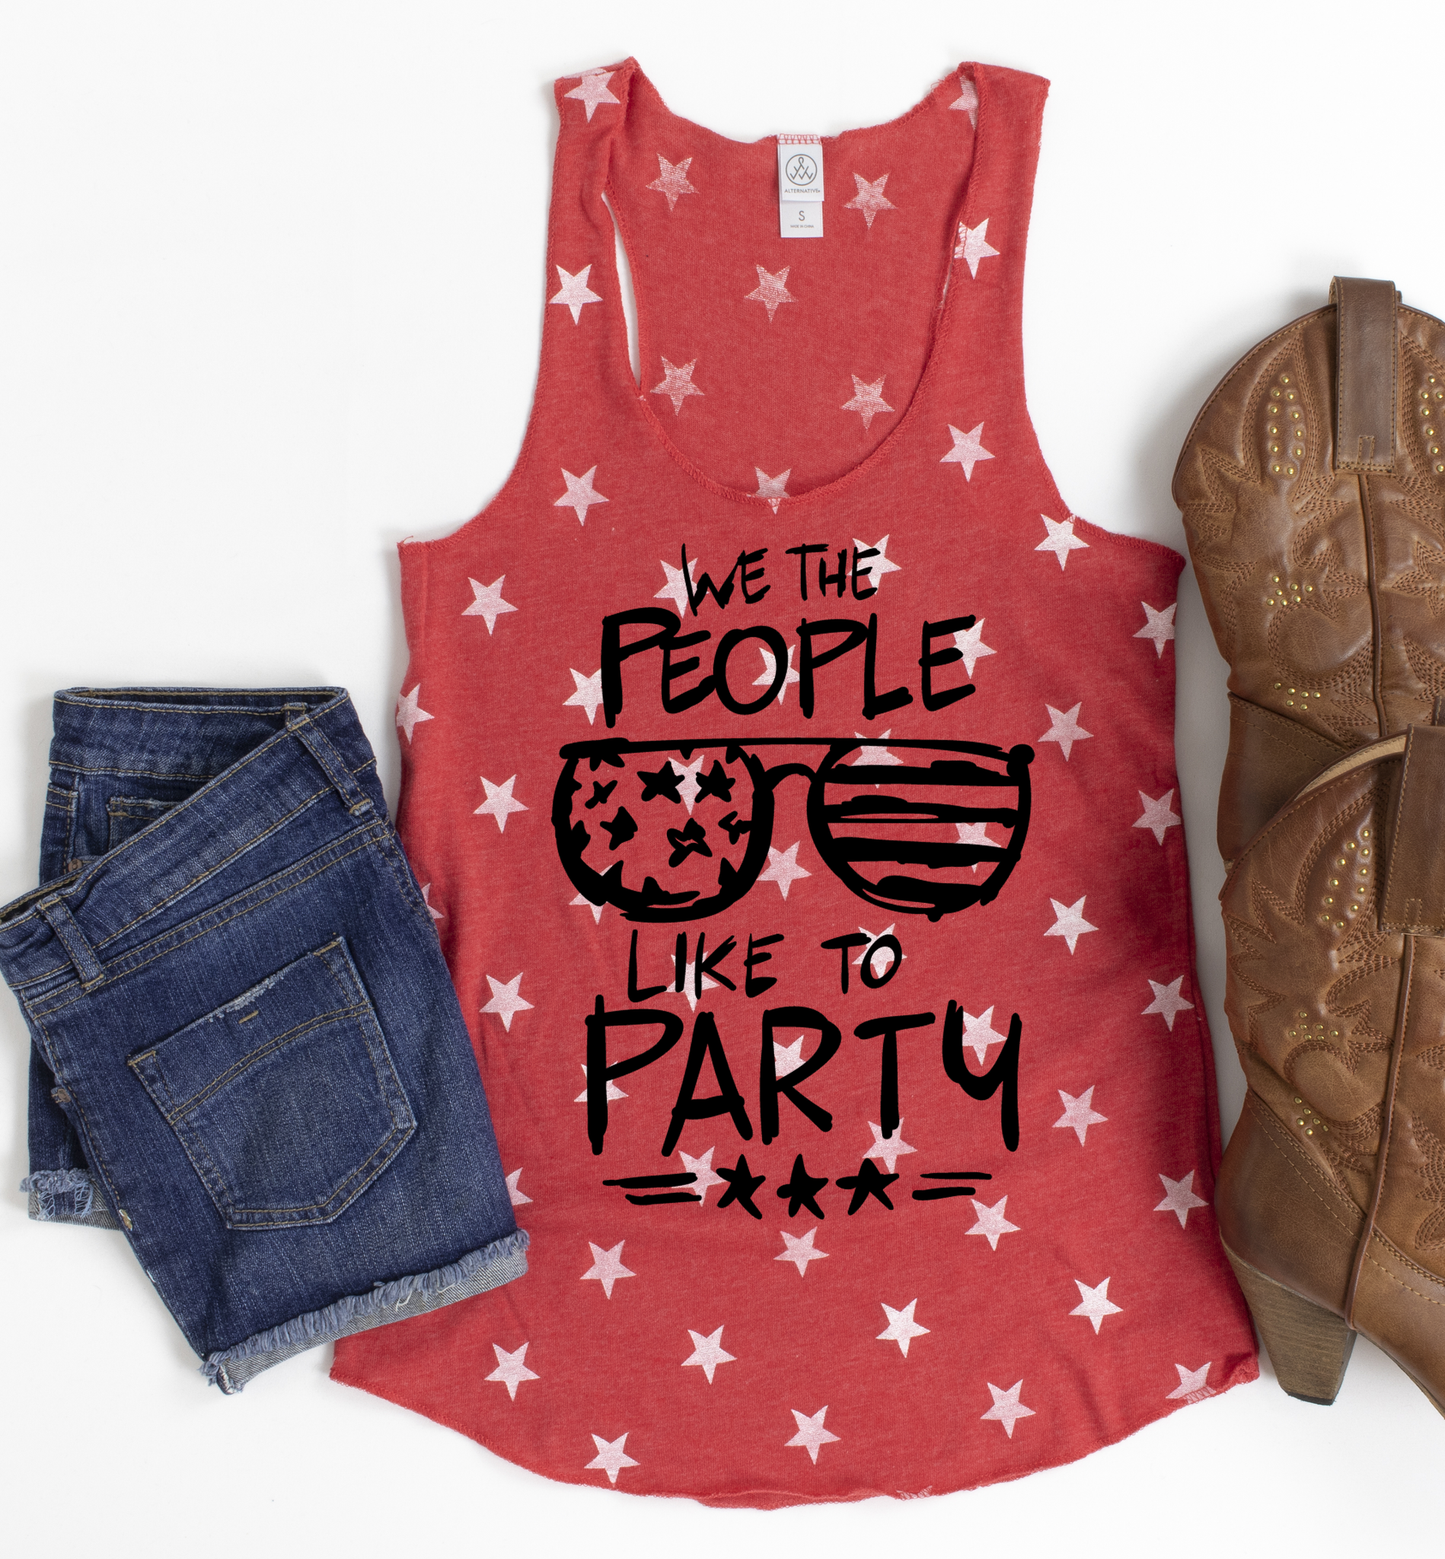 We the People like to party Shirt